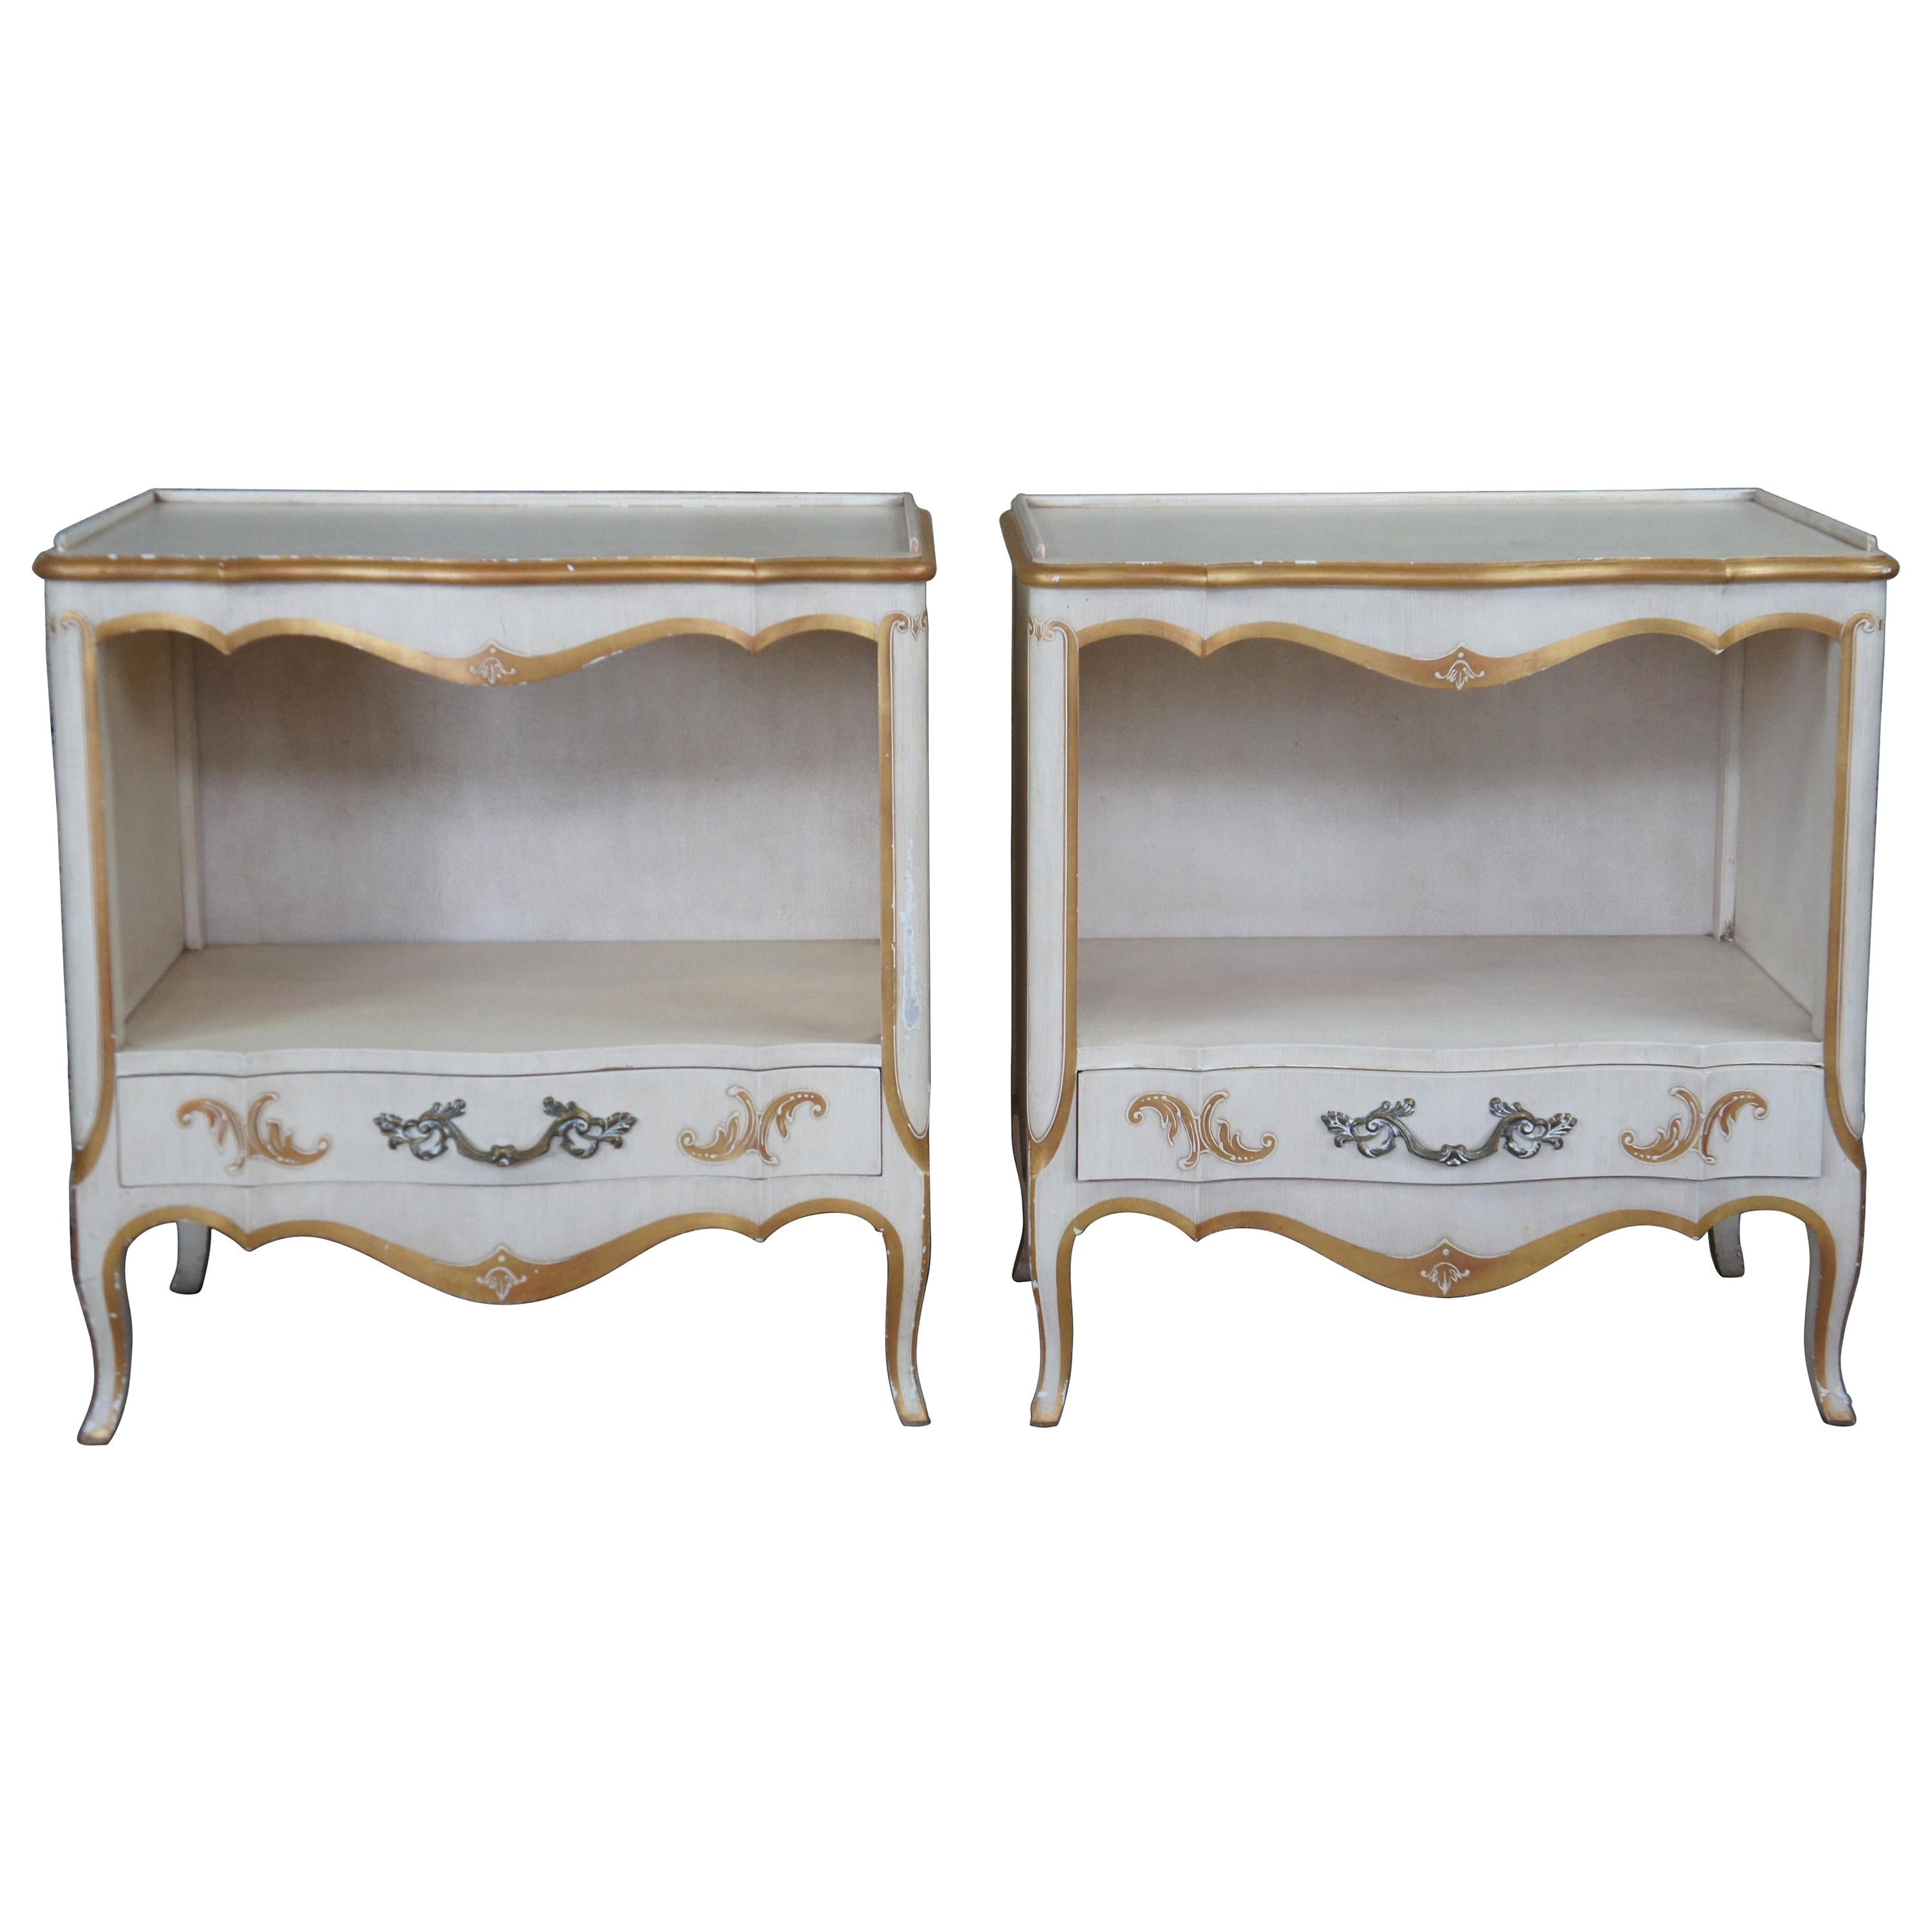 2 John Widdicomb French Provincial Nightstands Bed Side Table Italian Florentine